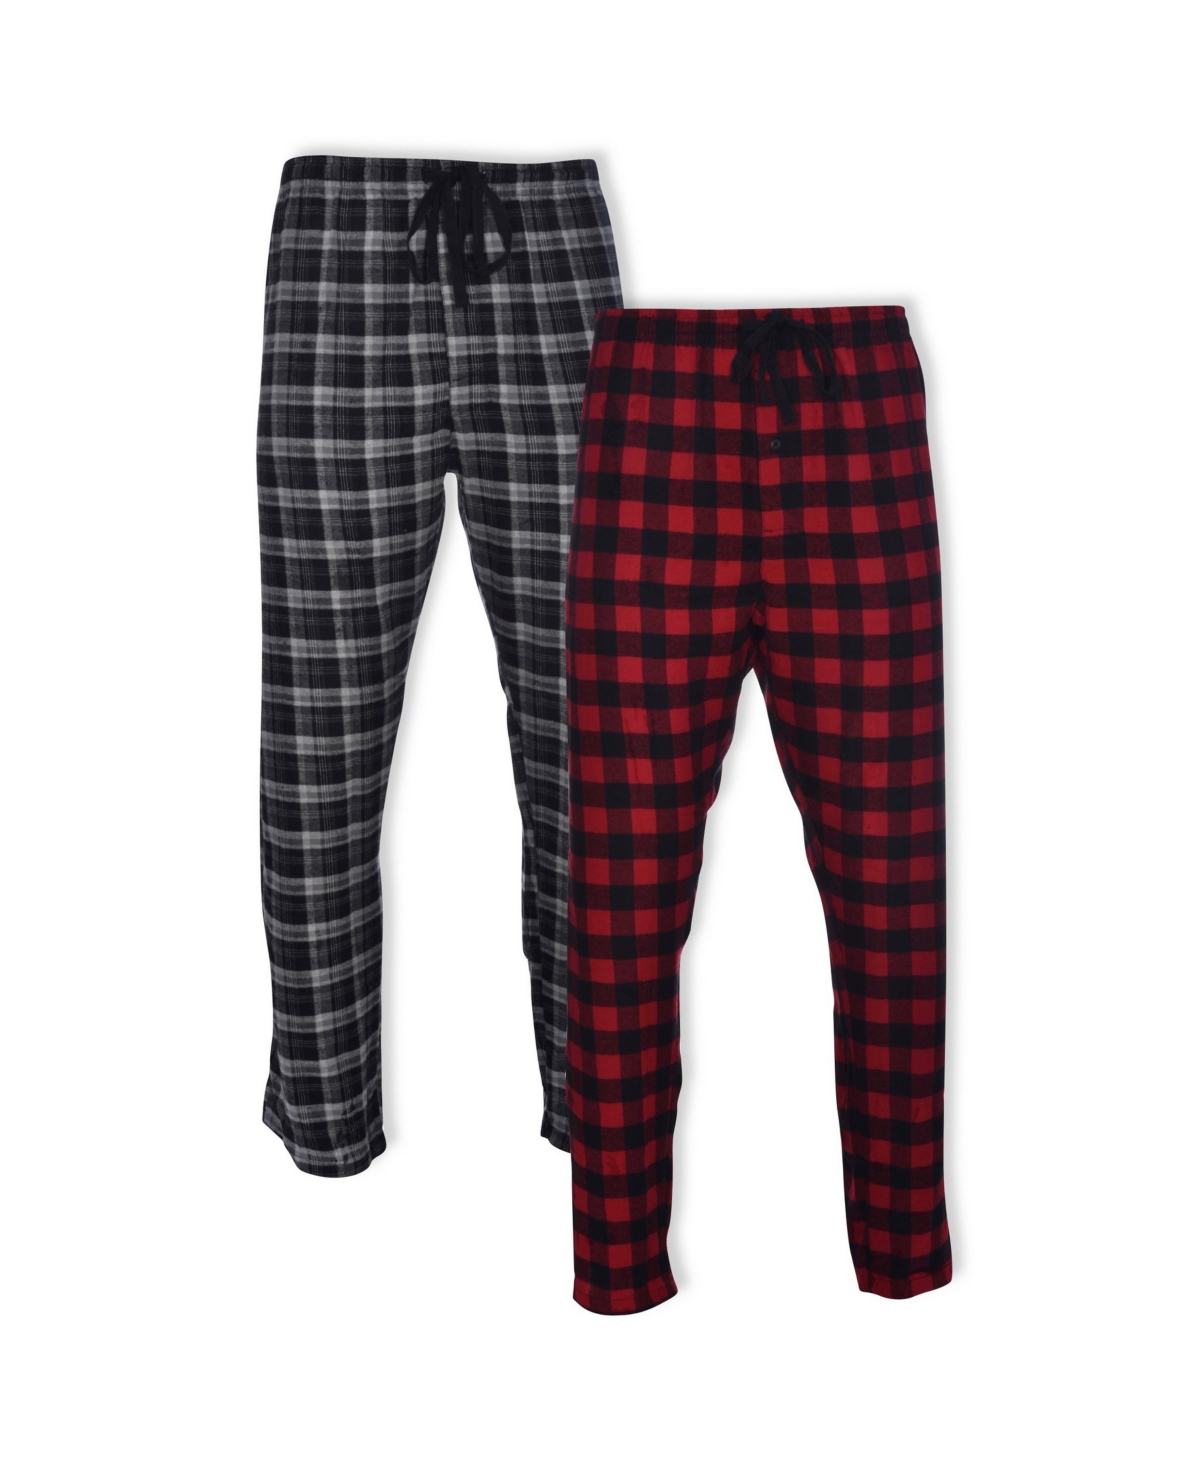 Hanes Men's Big and Tall Flannel Sleep Pant, 2 Pack - Red/Black Buffalo Check and Black Plaid